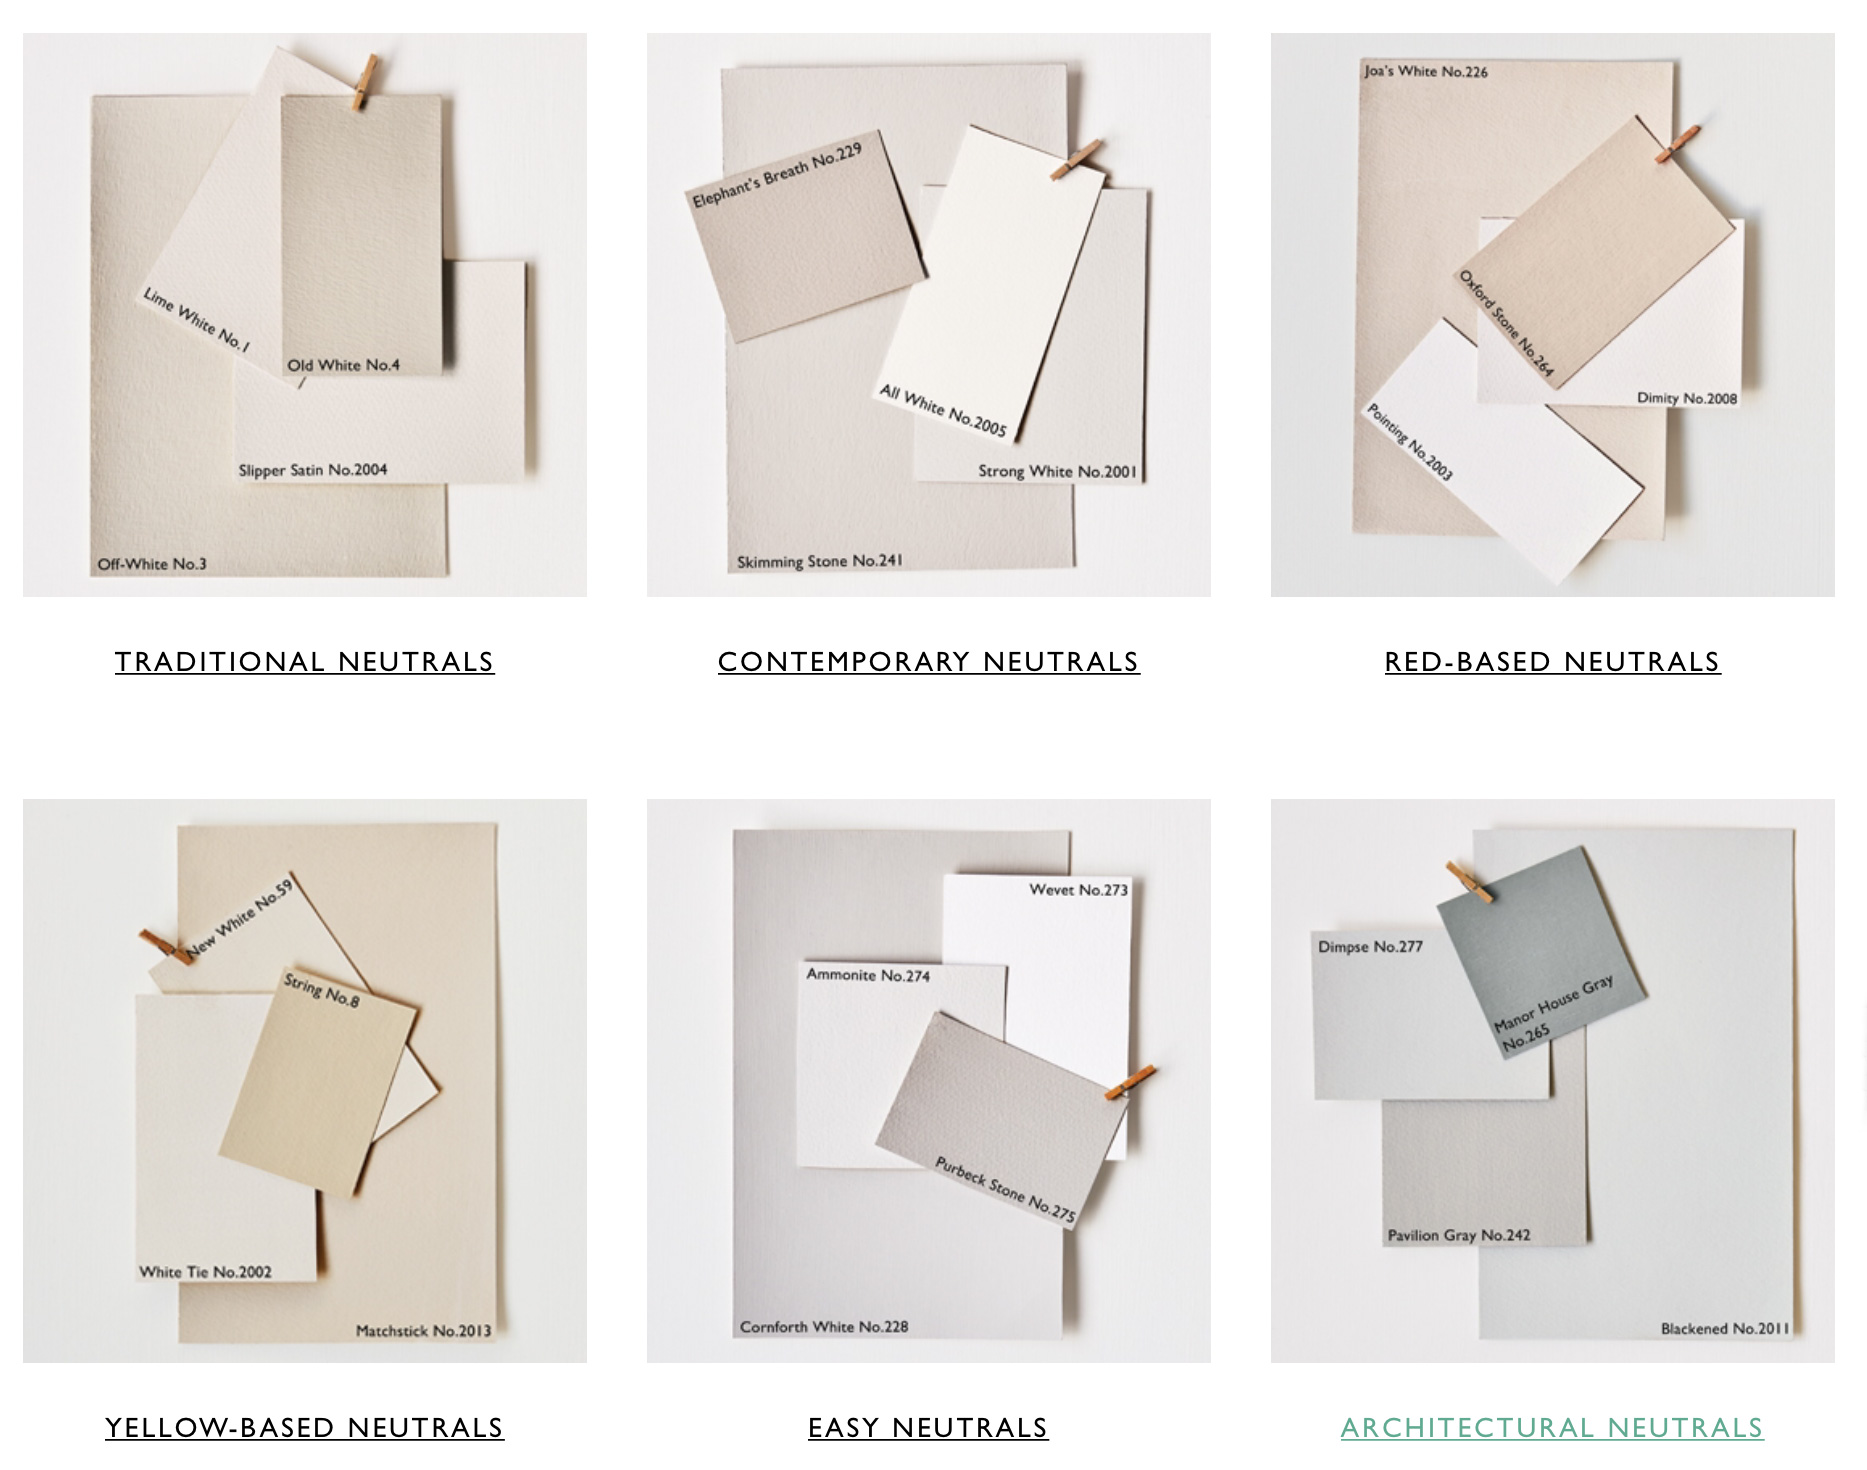 A selection of 'Grieges' from Farrow & Ball | Image from Farrow & Ball used under the Fair Use Doctrine.